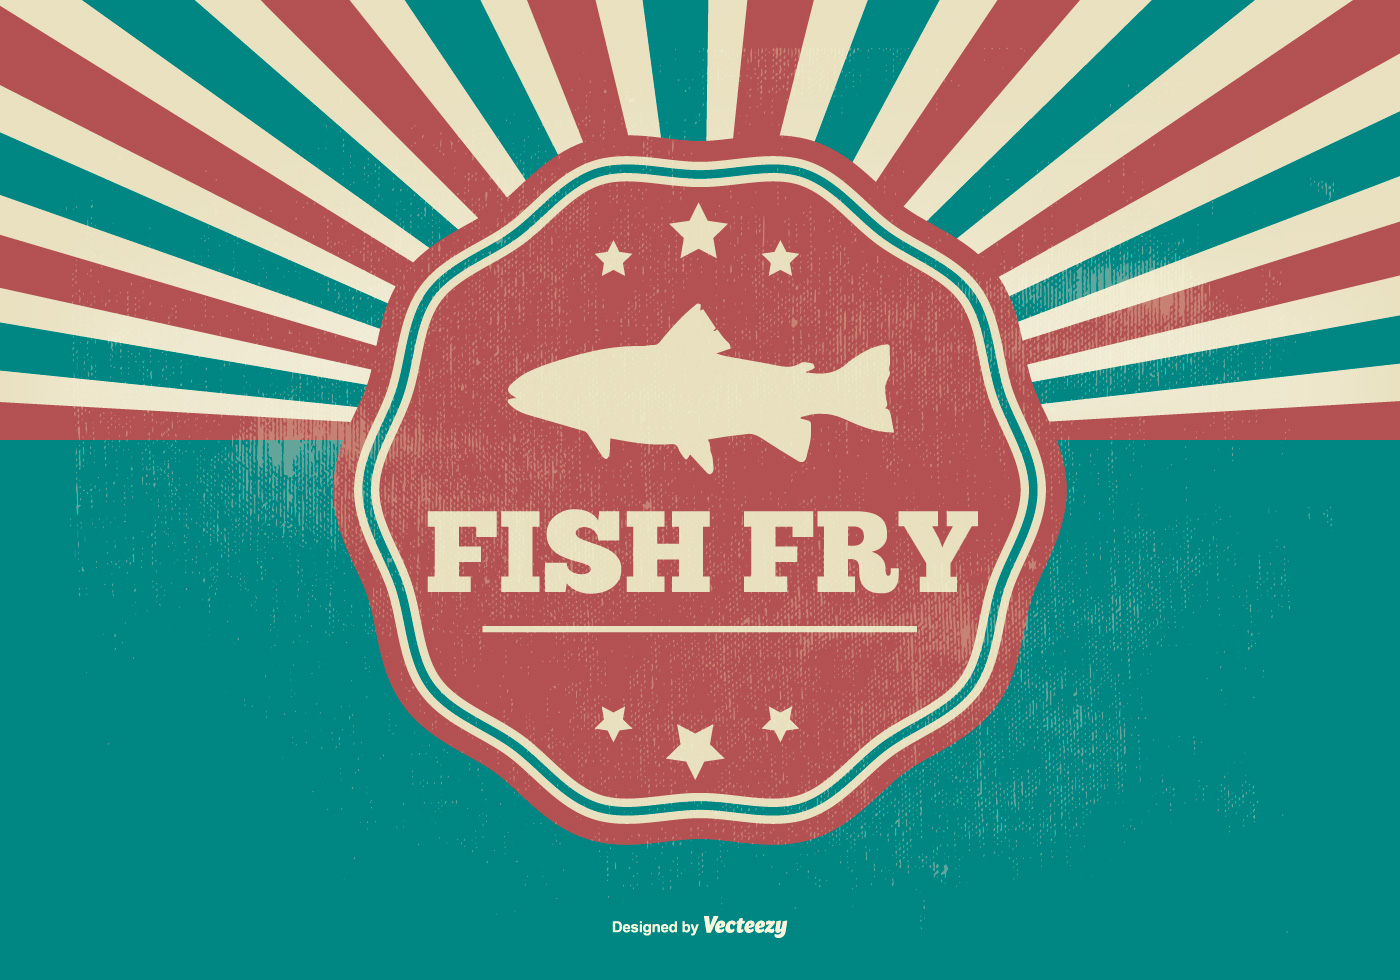 Download Fish Fry Retro Illustration - Download Free Vector Art, Stock Graphics & Images